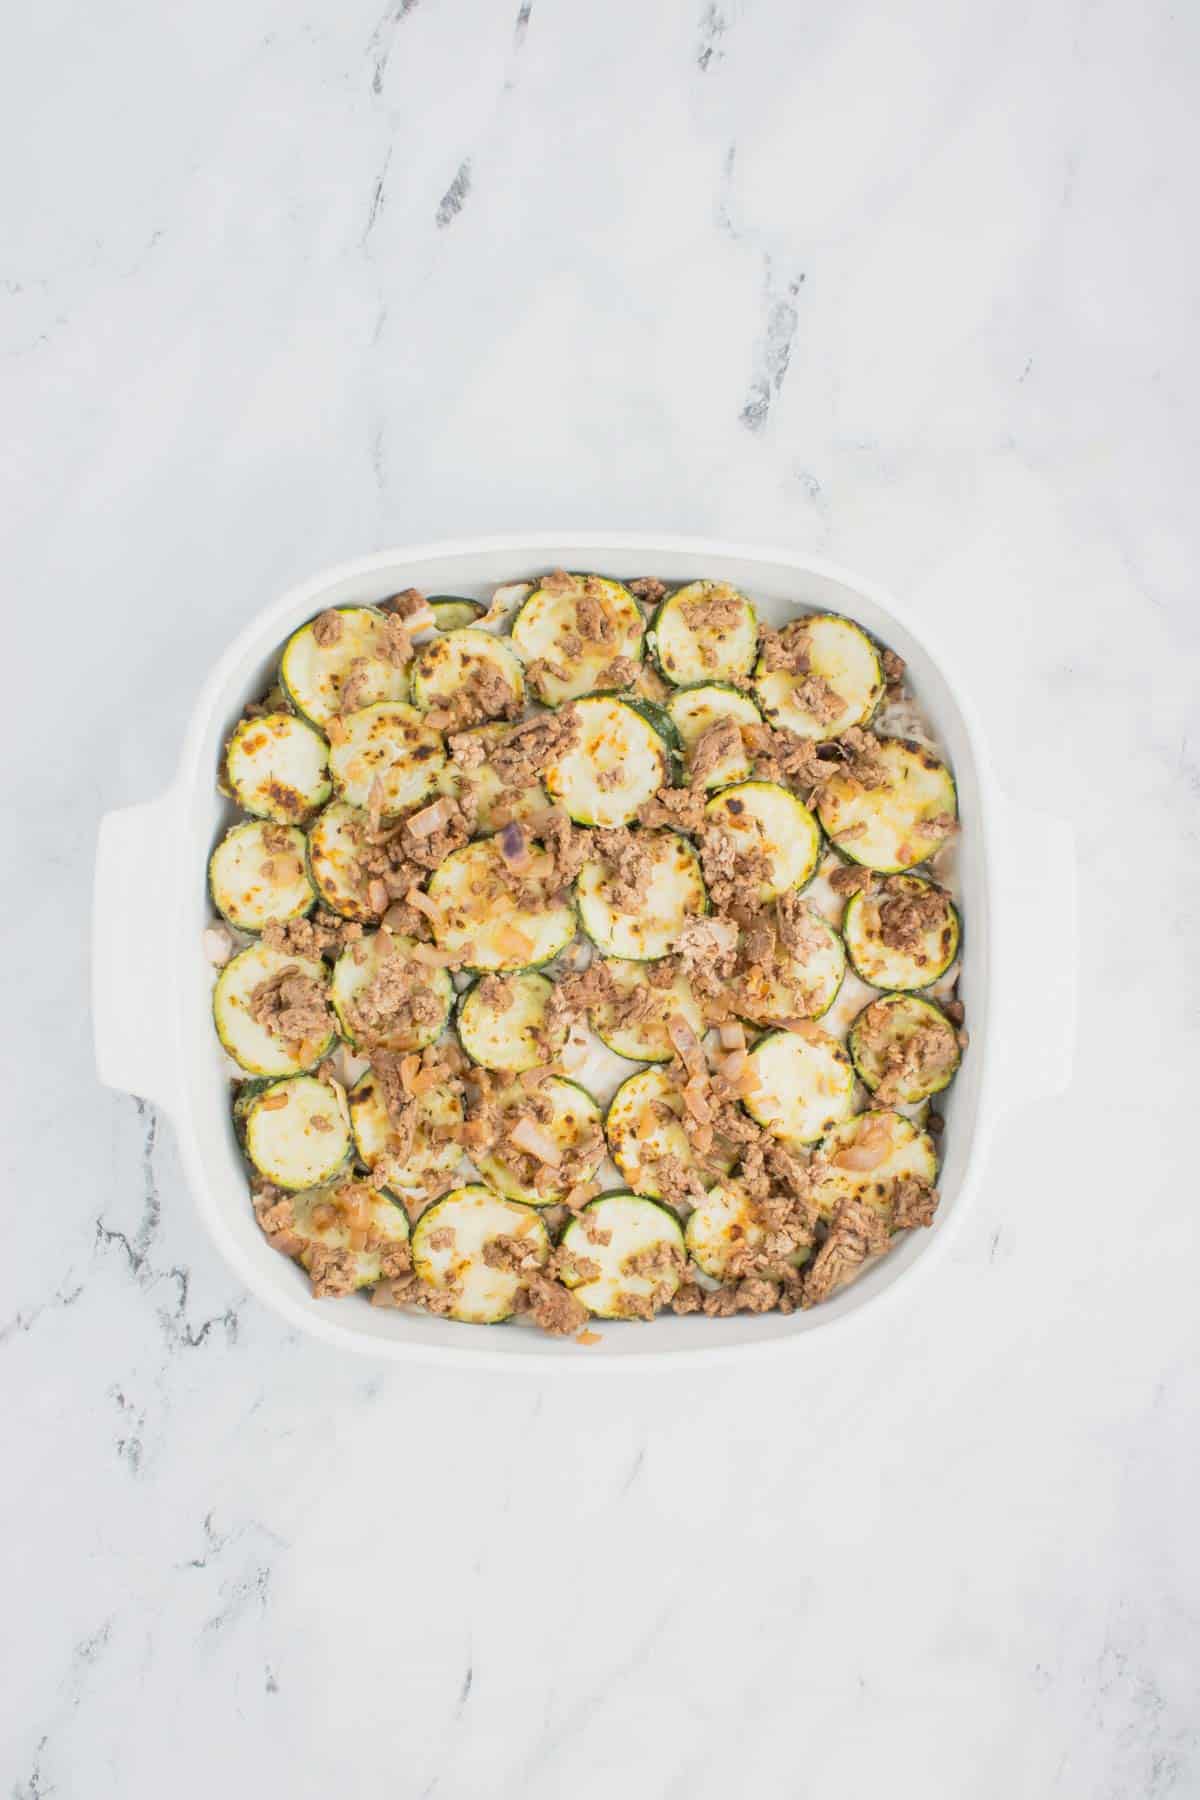 ground beef on top of zucchini slices in a baking dish